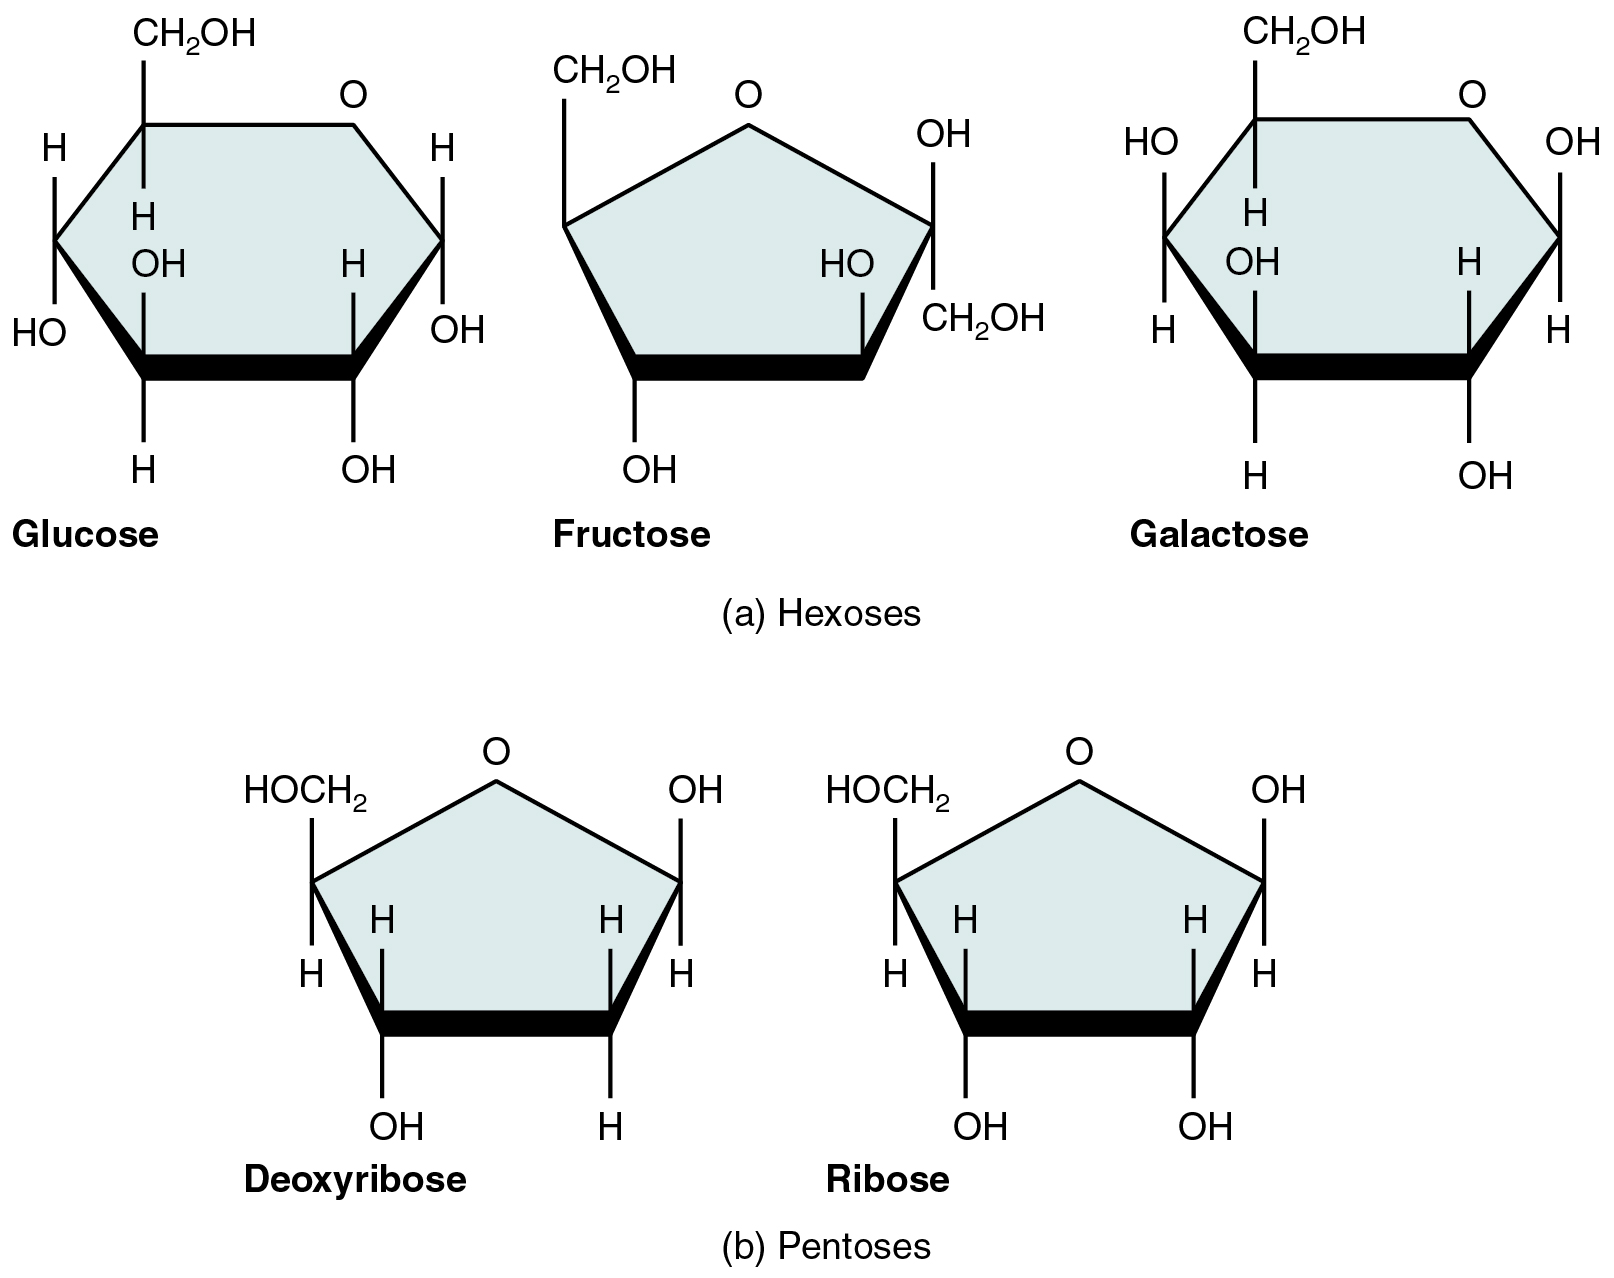 This figure shows the structure of glucose, fructose, galactose, deoxyribose, and ribose.